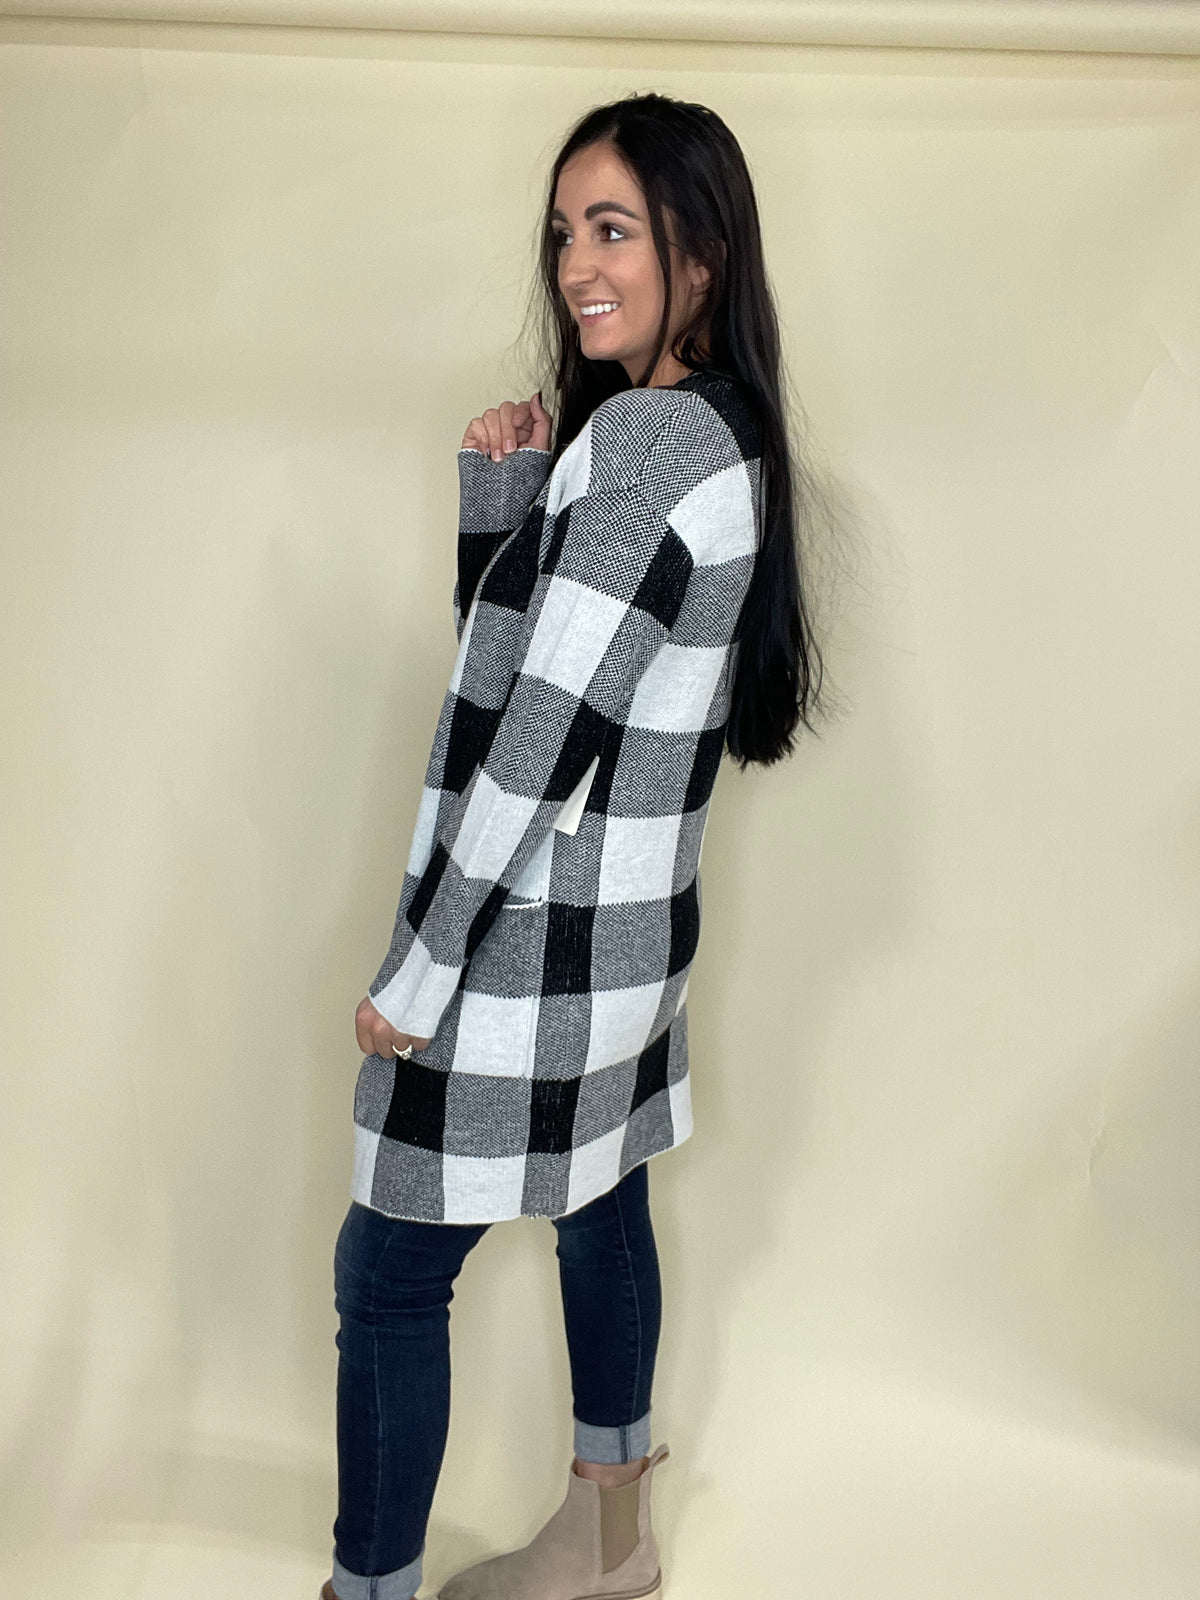 Giving Your Opinion- Black & White Plaid Cardigan